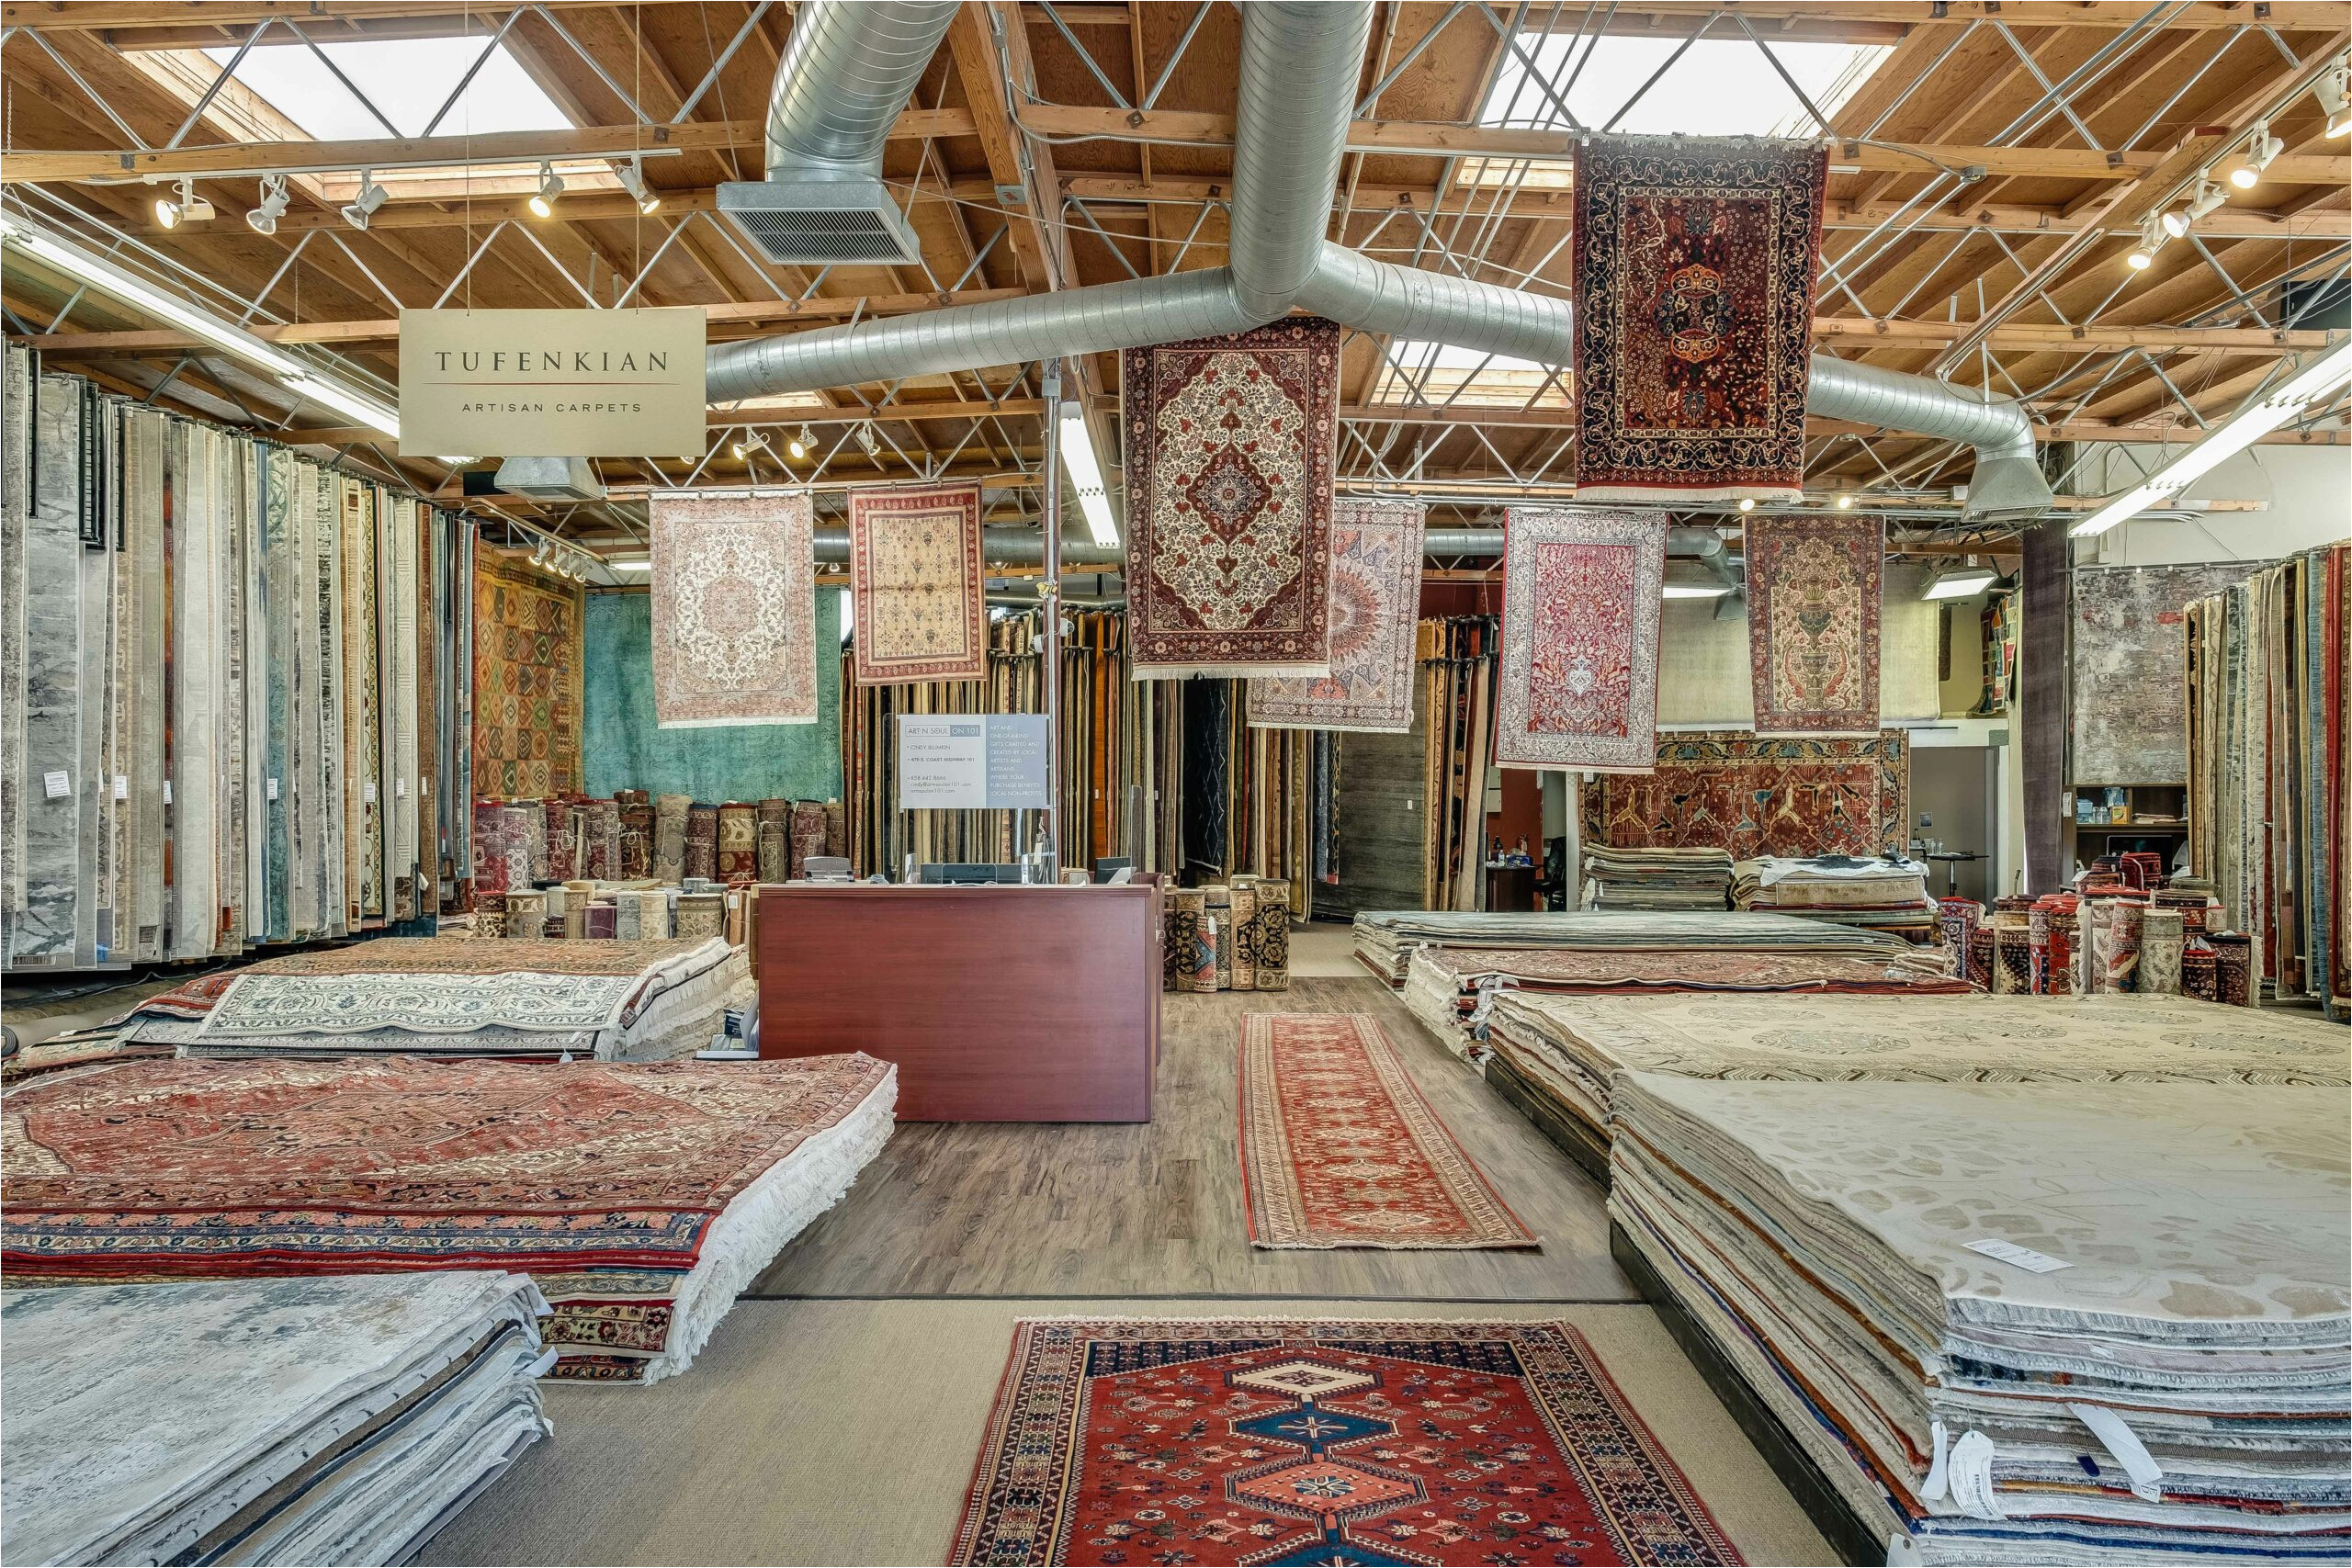 Area Rugs San Diego Ca About Our Rug Store San Diego area Rugs for Sale